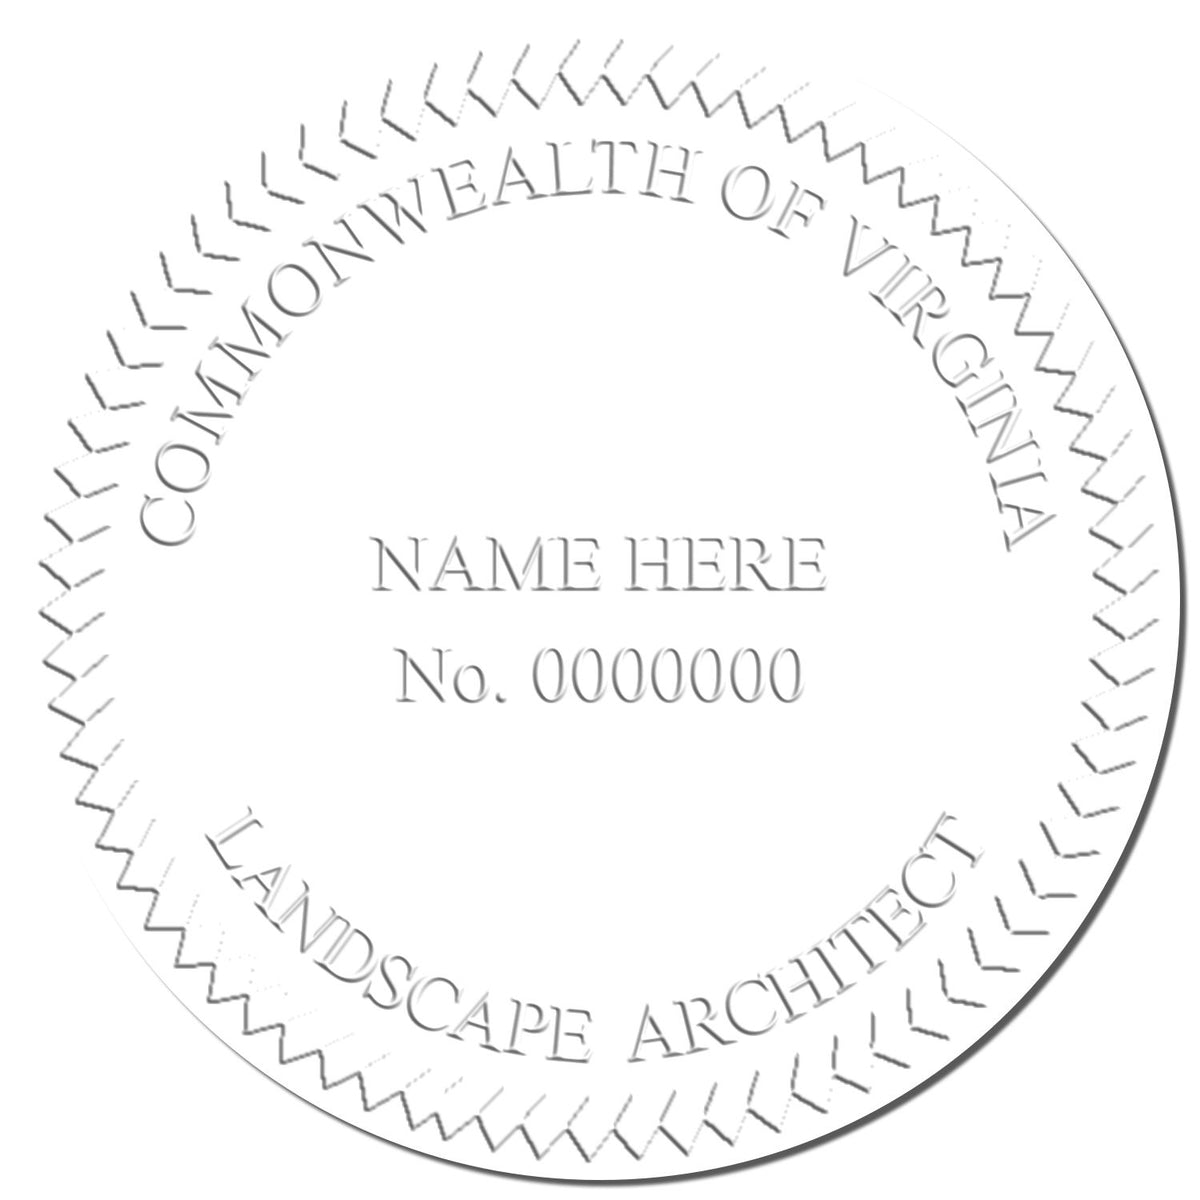 This paper is stamped with a sample imprint of the Hybrid Virginia Landscape Architect Seal, signifying its quality and reliability.